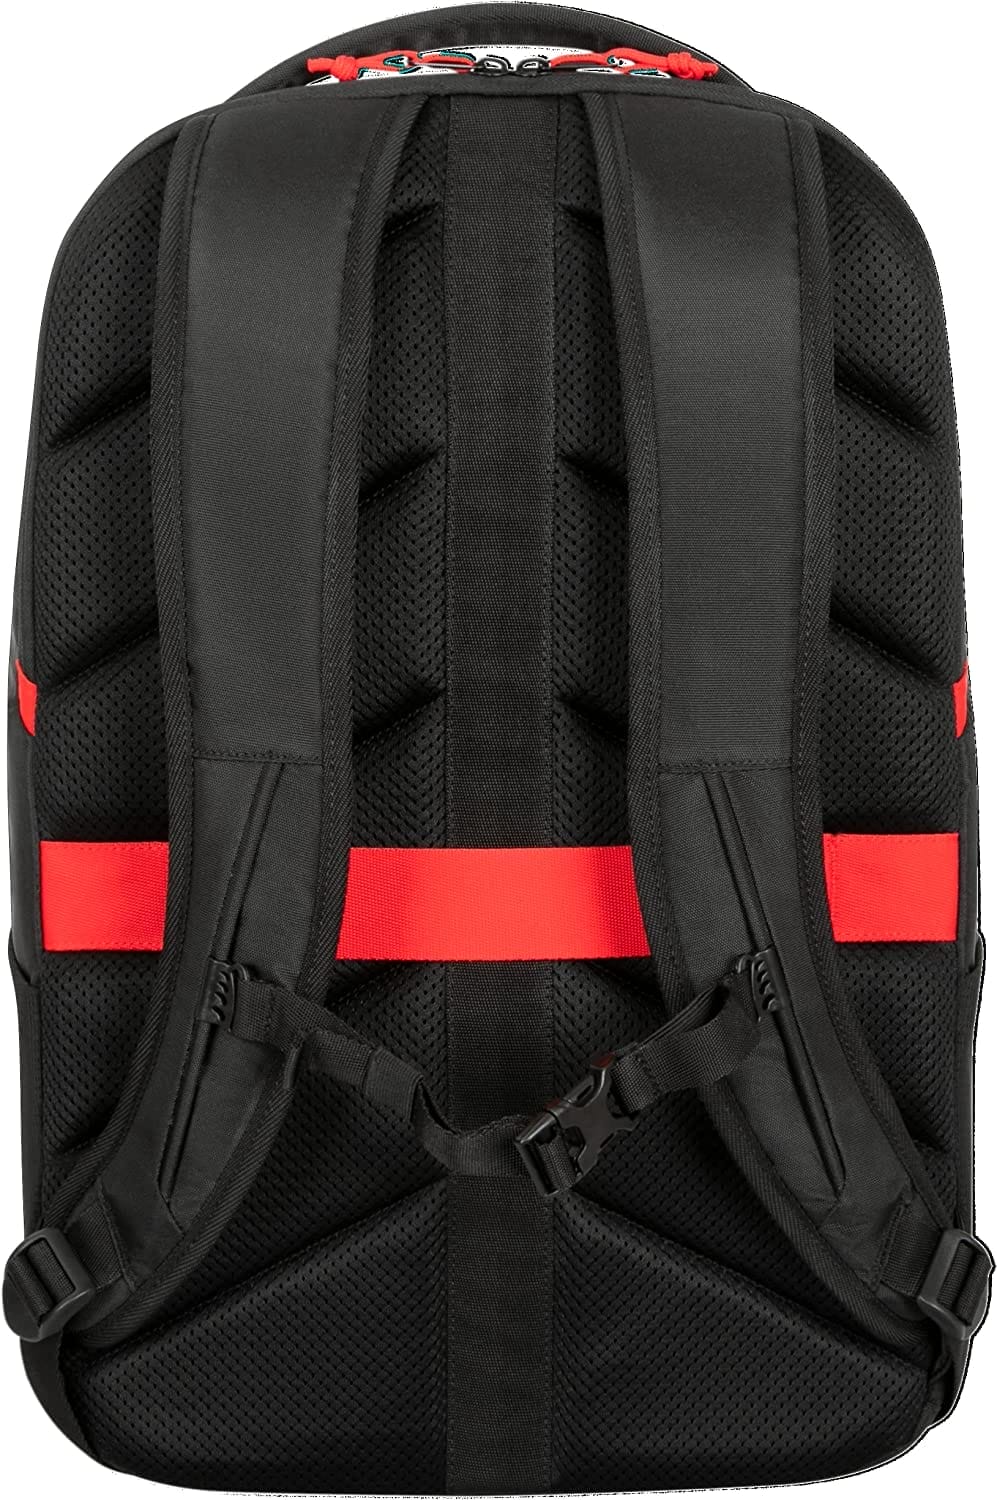 Image shows the back area of the backpack.